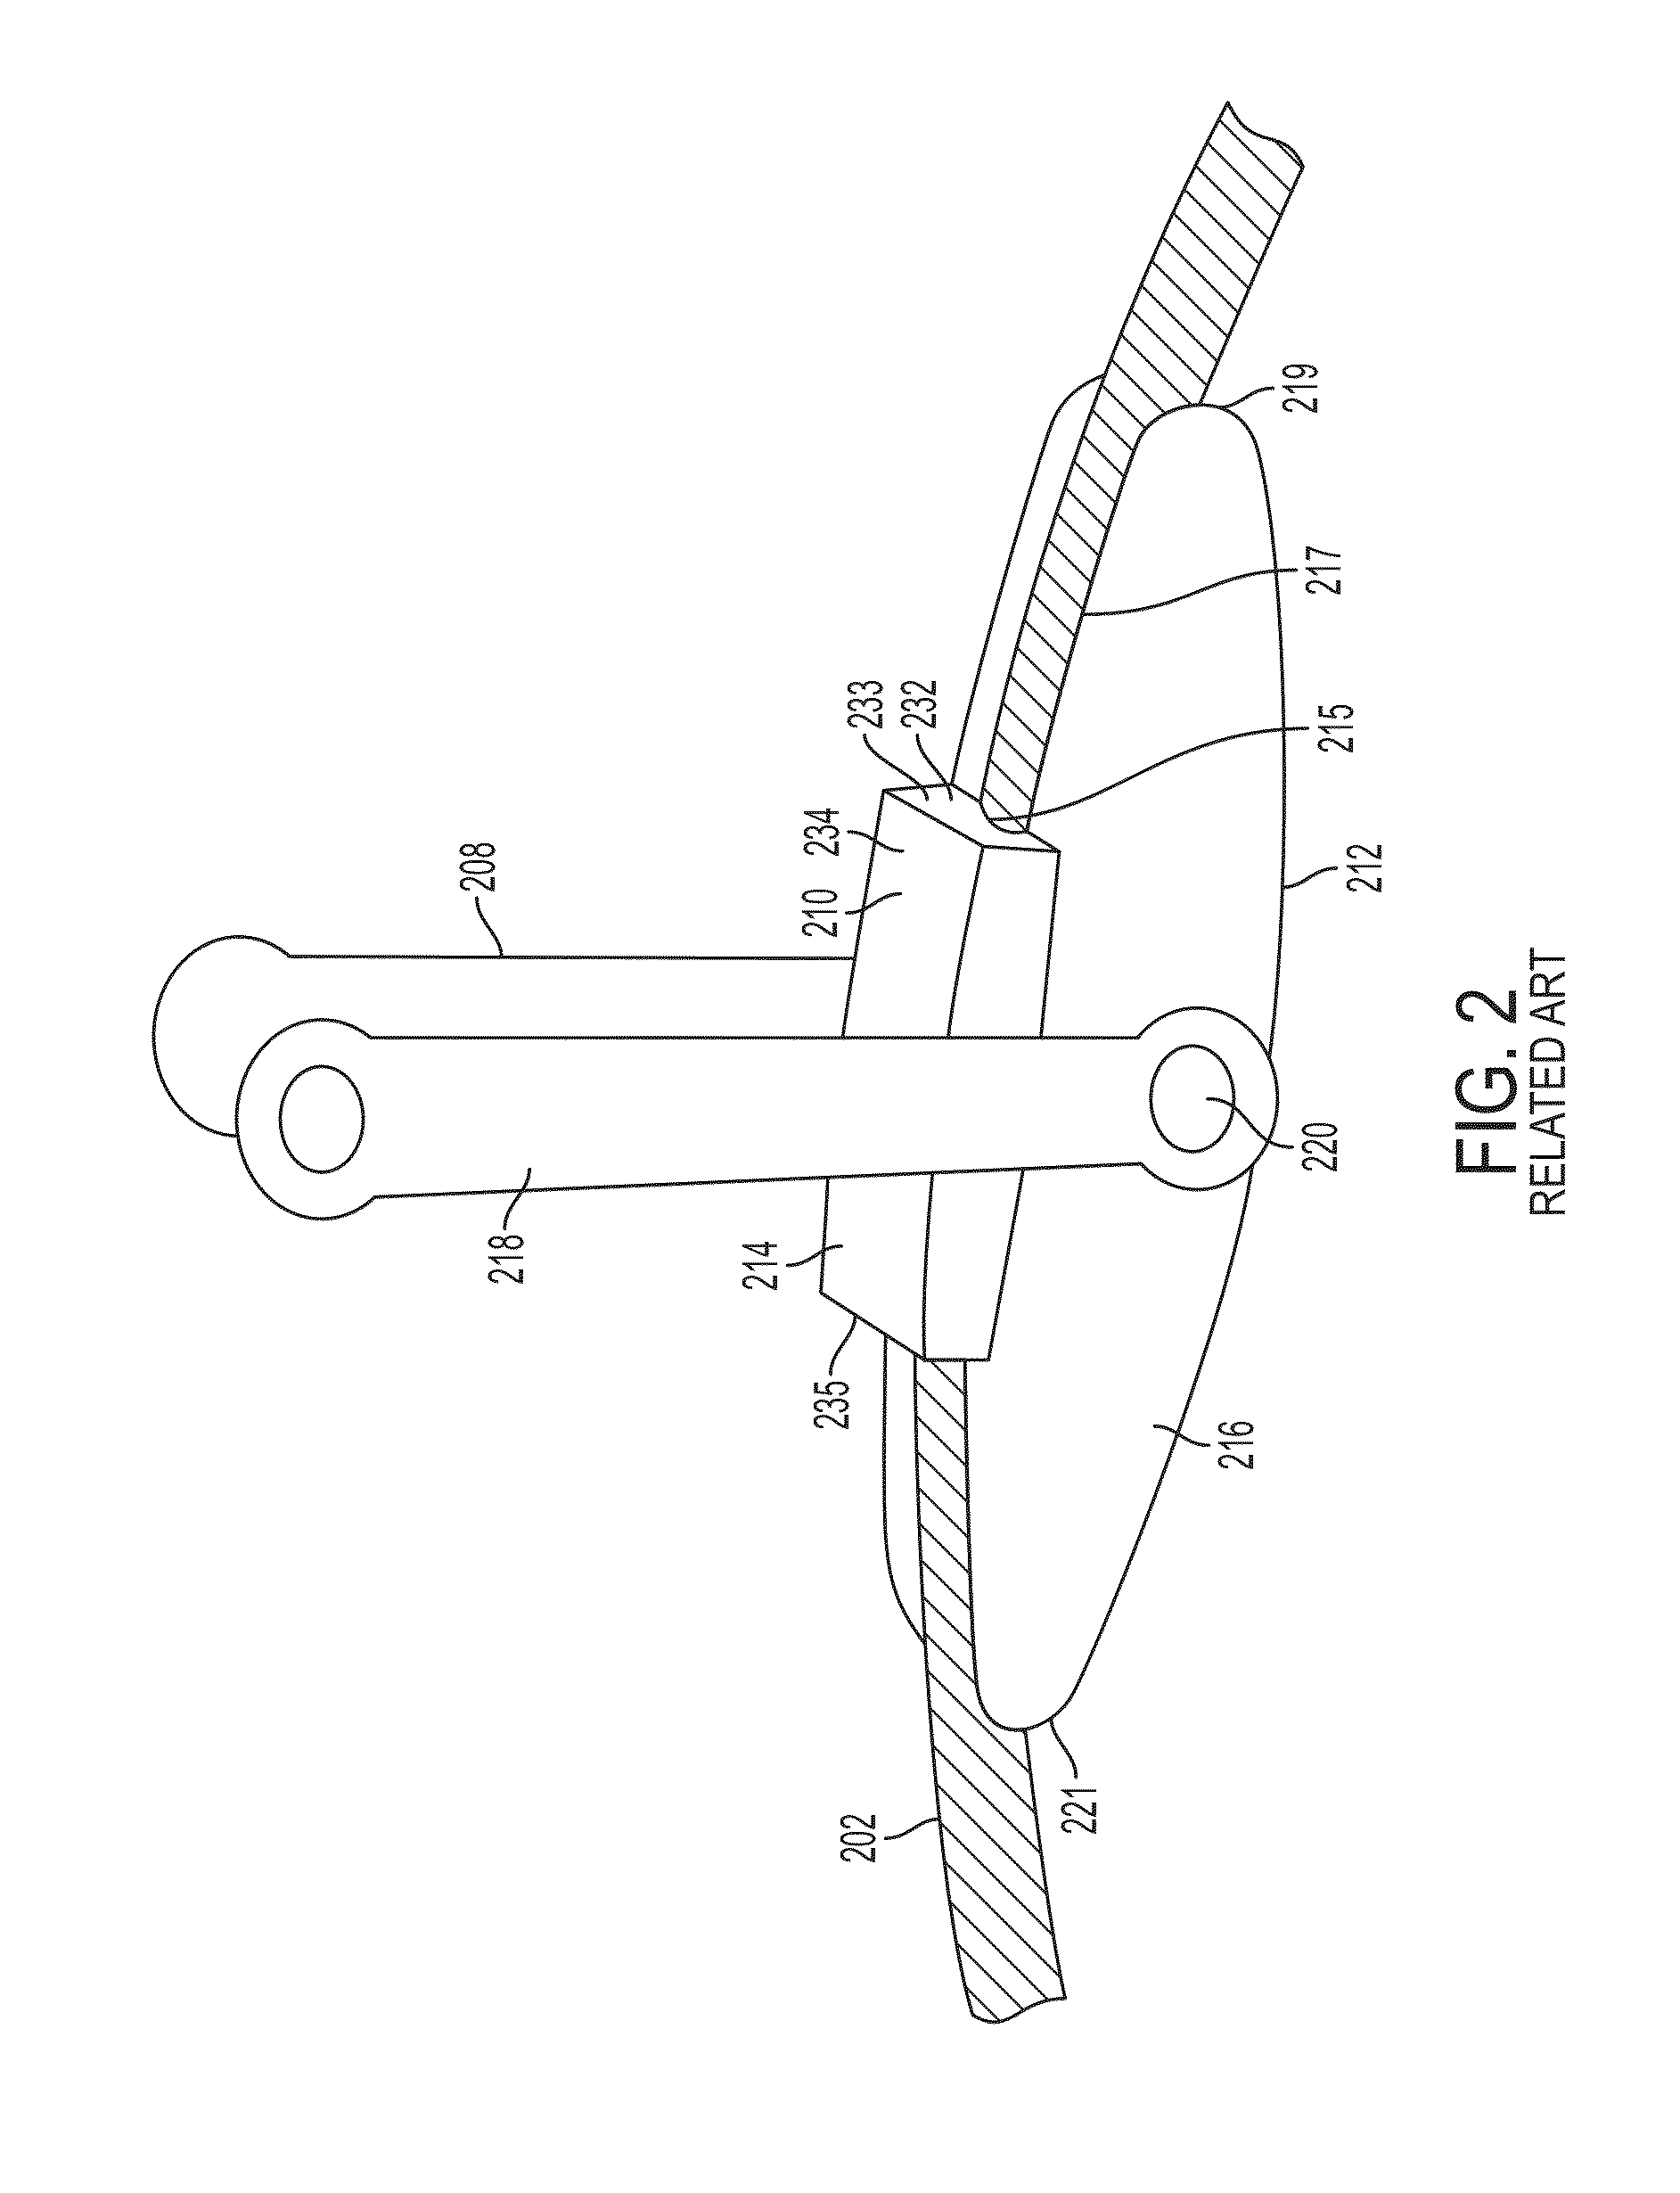 Apparatuses, Systems and Methods for  Determining Effective Wind Speed